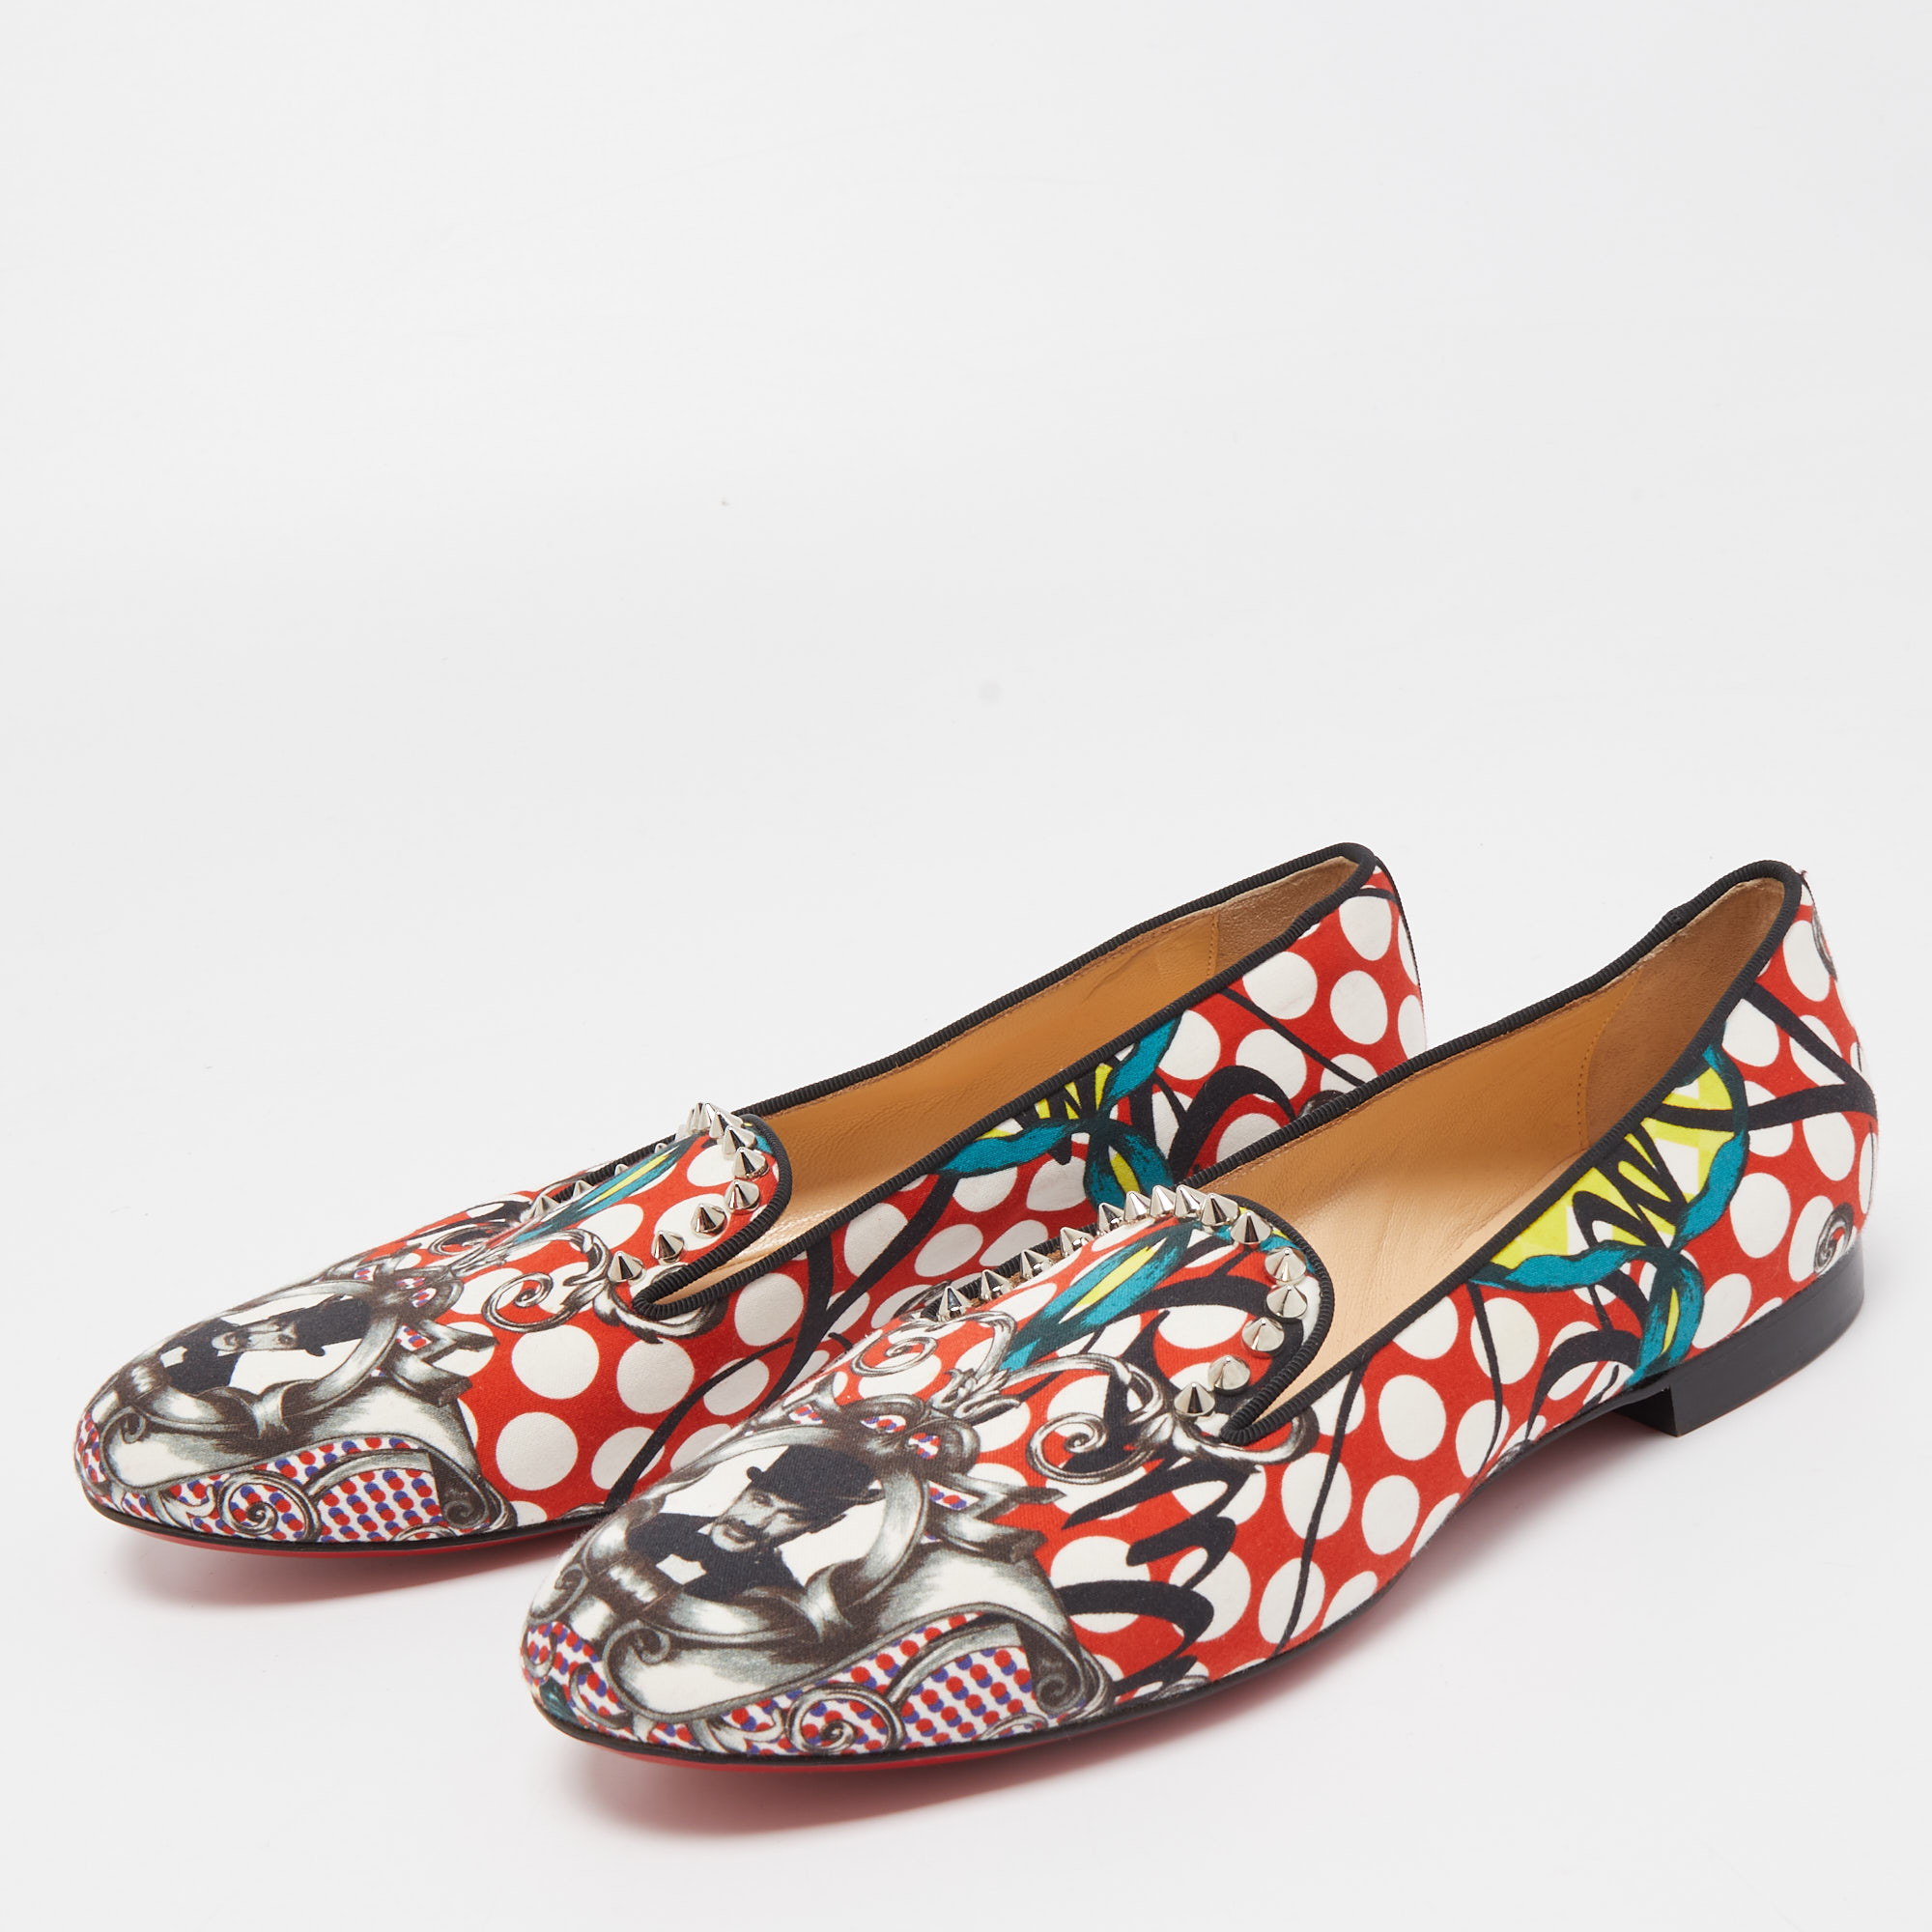 

Christian Louboutin Multicolor Printed Fabric Sakouette Spiked Smoking Slippers Size